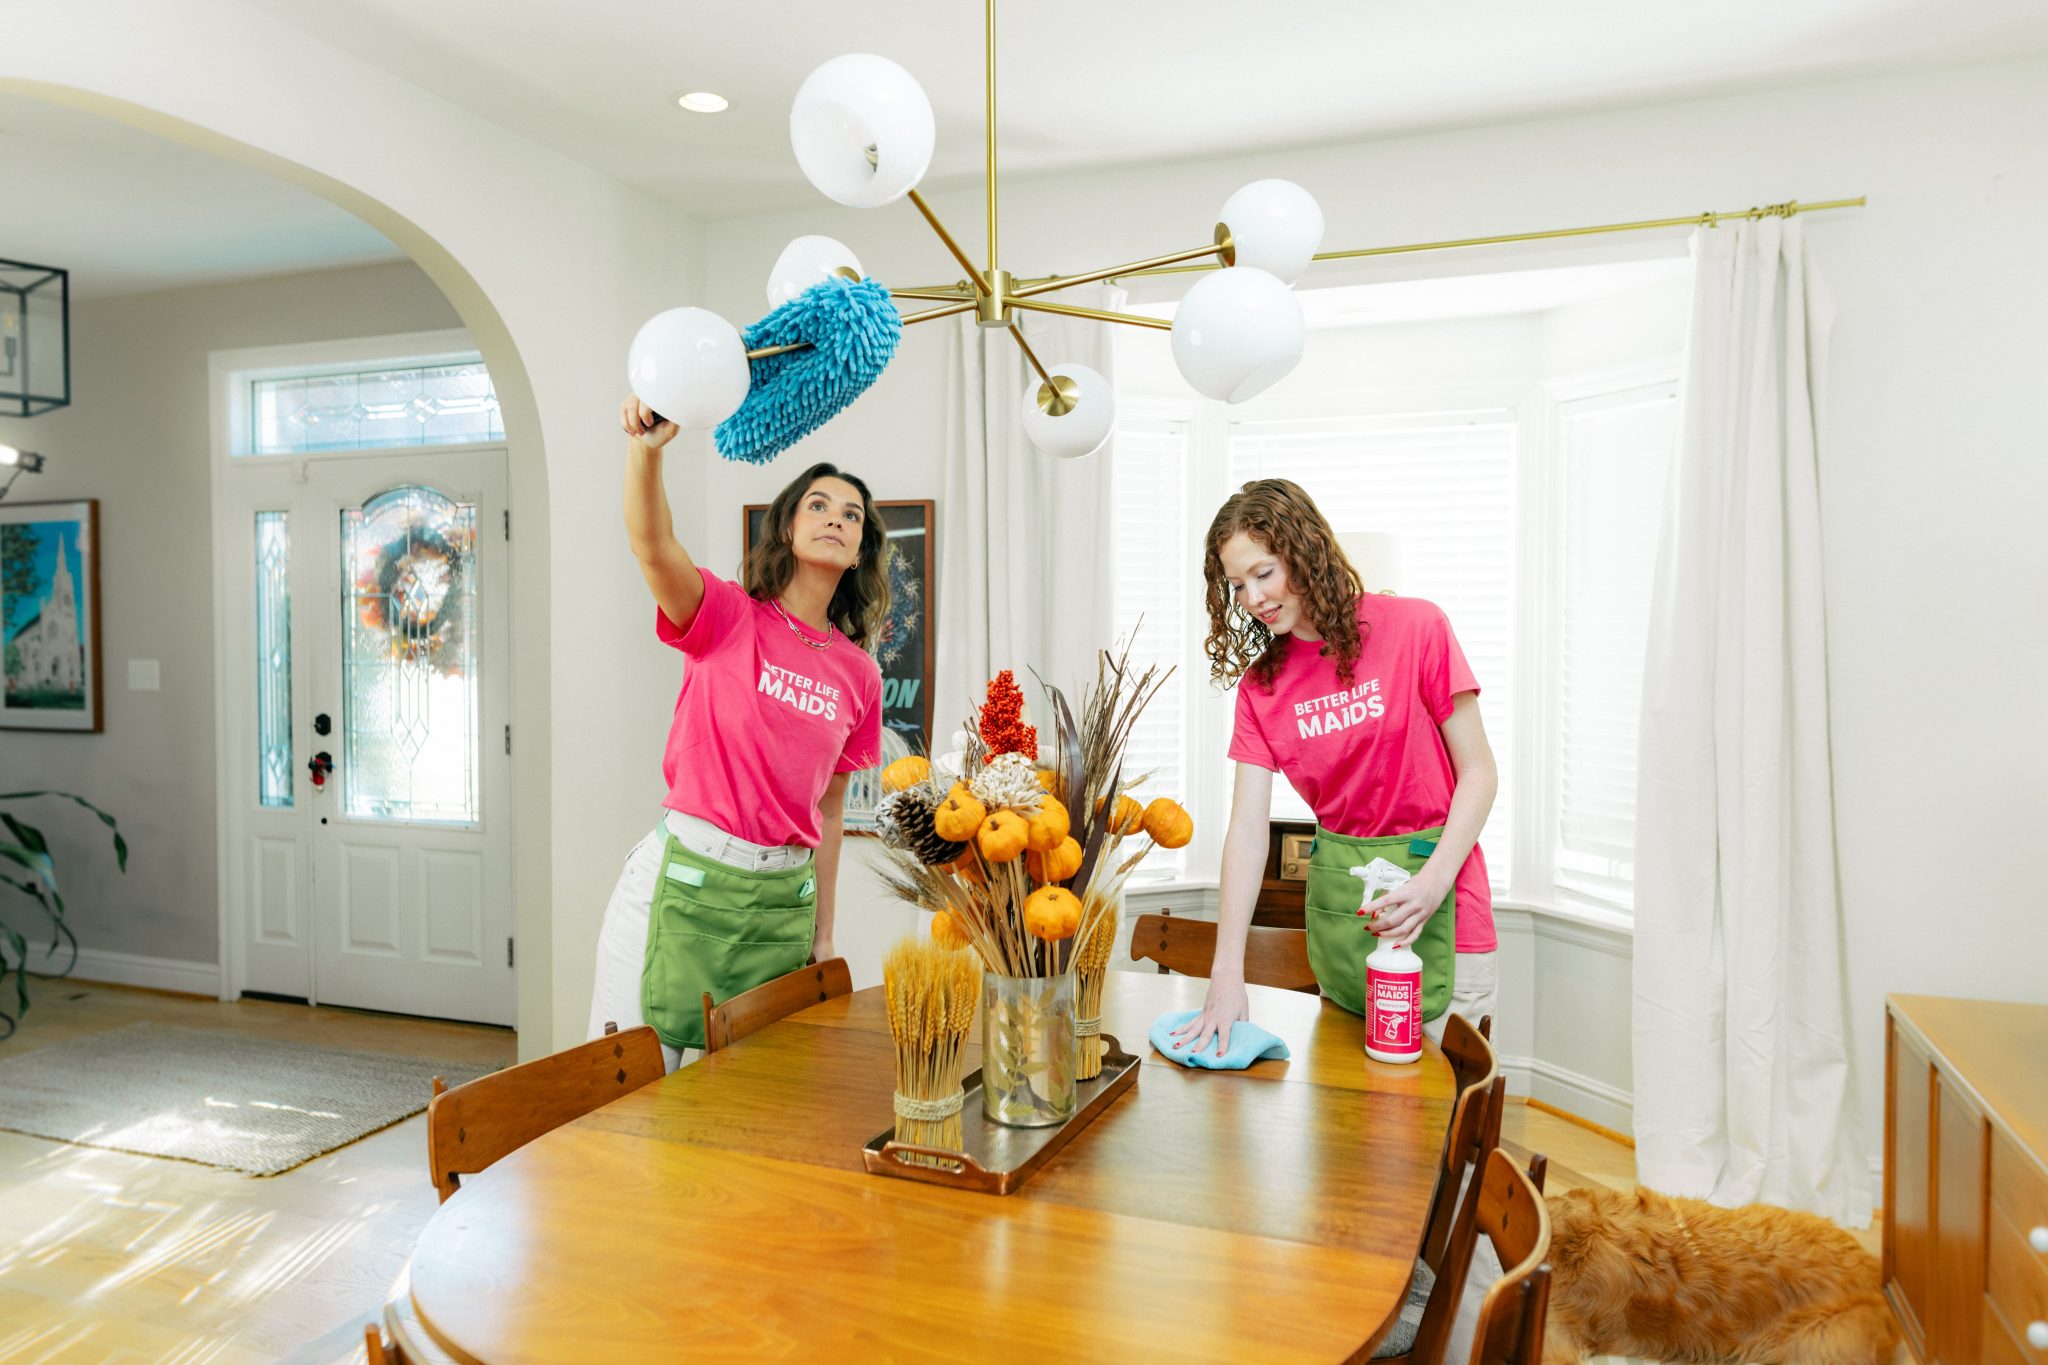 better life maids cleaning in chesterfield, best maids in chesterfield, cleaning companies near chesterfield, cleaning company near me, amazing maids, best maids in chesterfield, best cleaning service in chesterfield mo